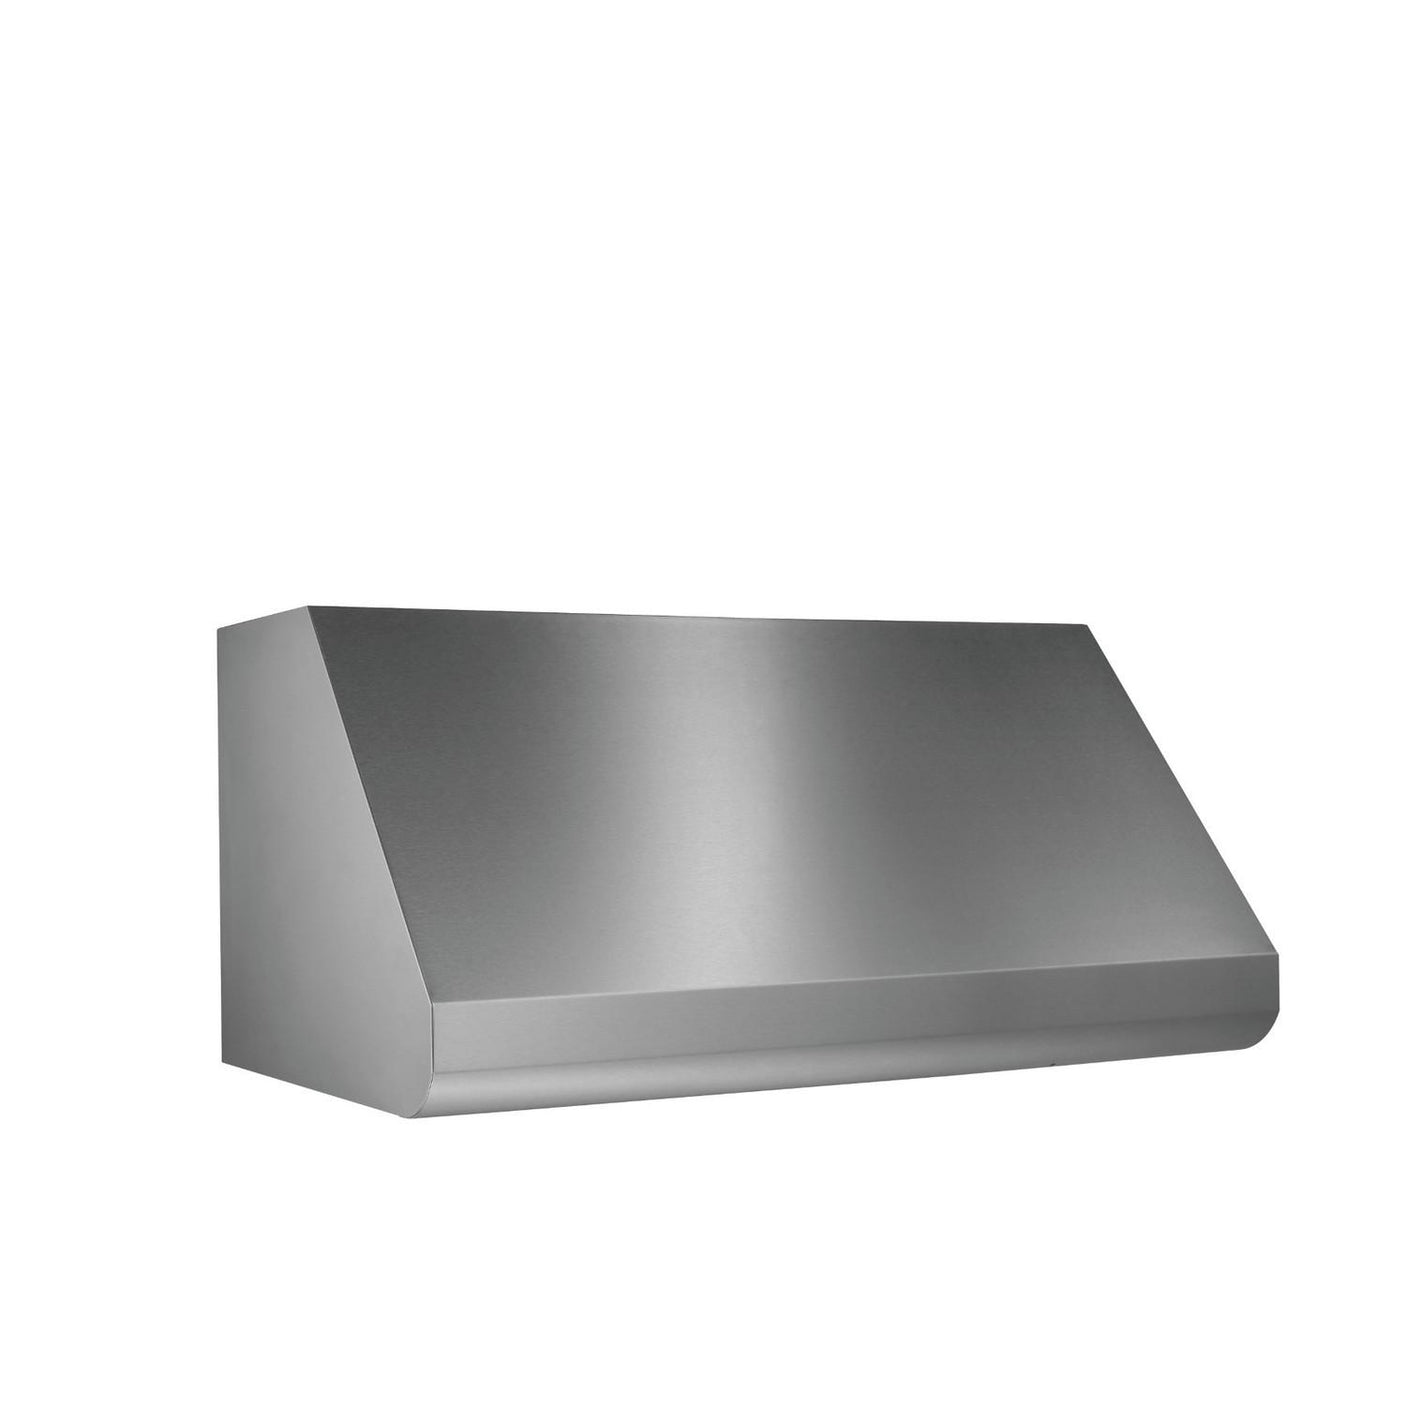 **DISCONTINUED** Broan® Elite E60000 42-inch Canopy Wall-Mount Range Hood Stainless Steel